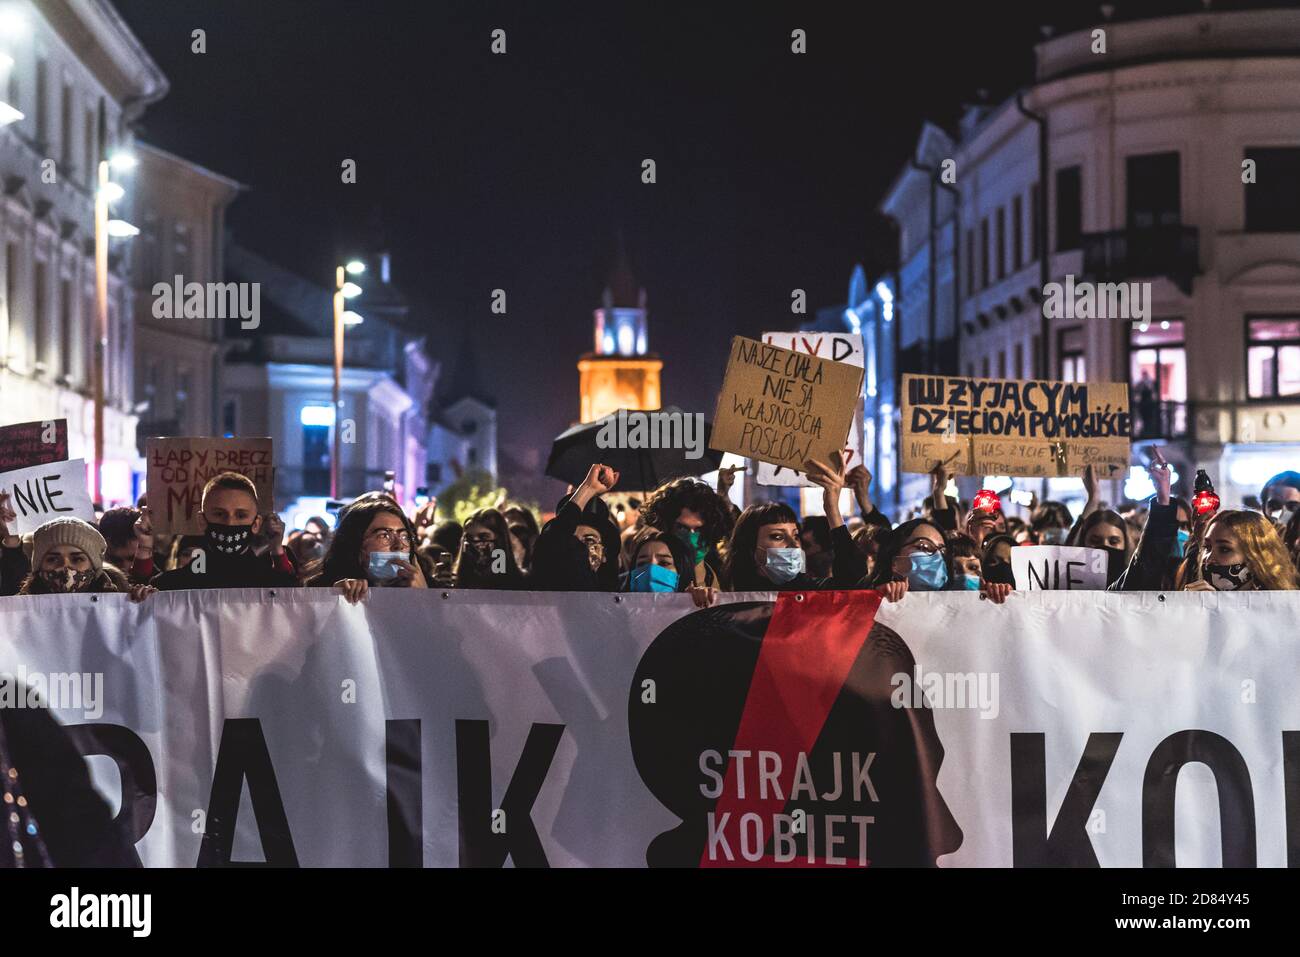 Lublin, Poland - October 23, 2020: People in city centre during protest organized by Strajk Kobiet against abortion ban in Poland Stock Photo